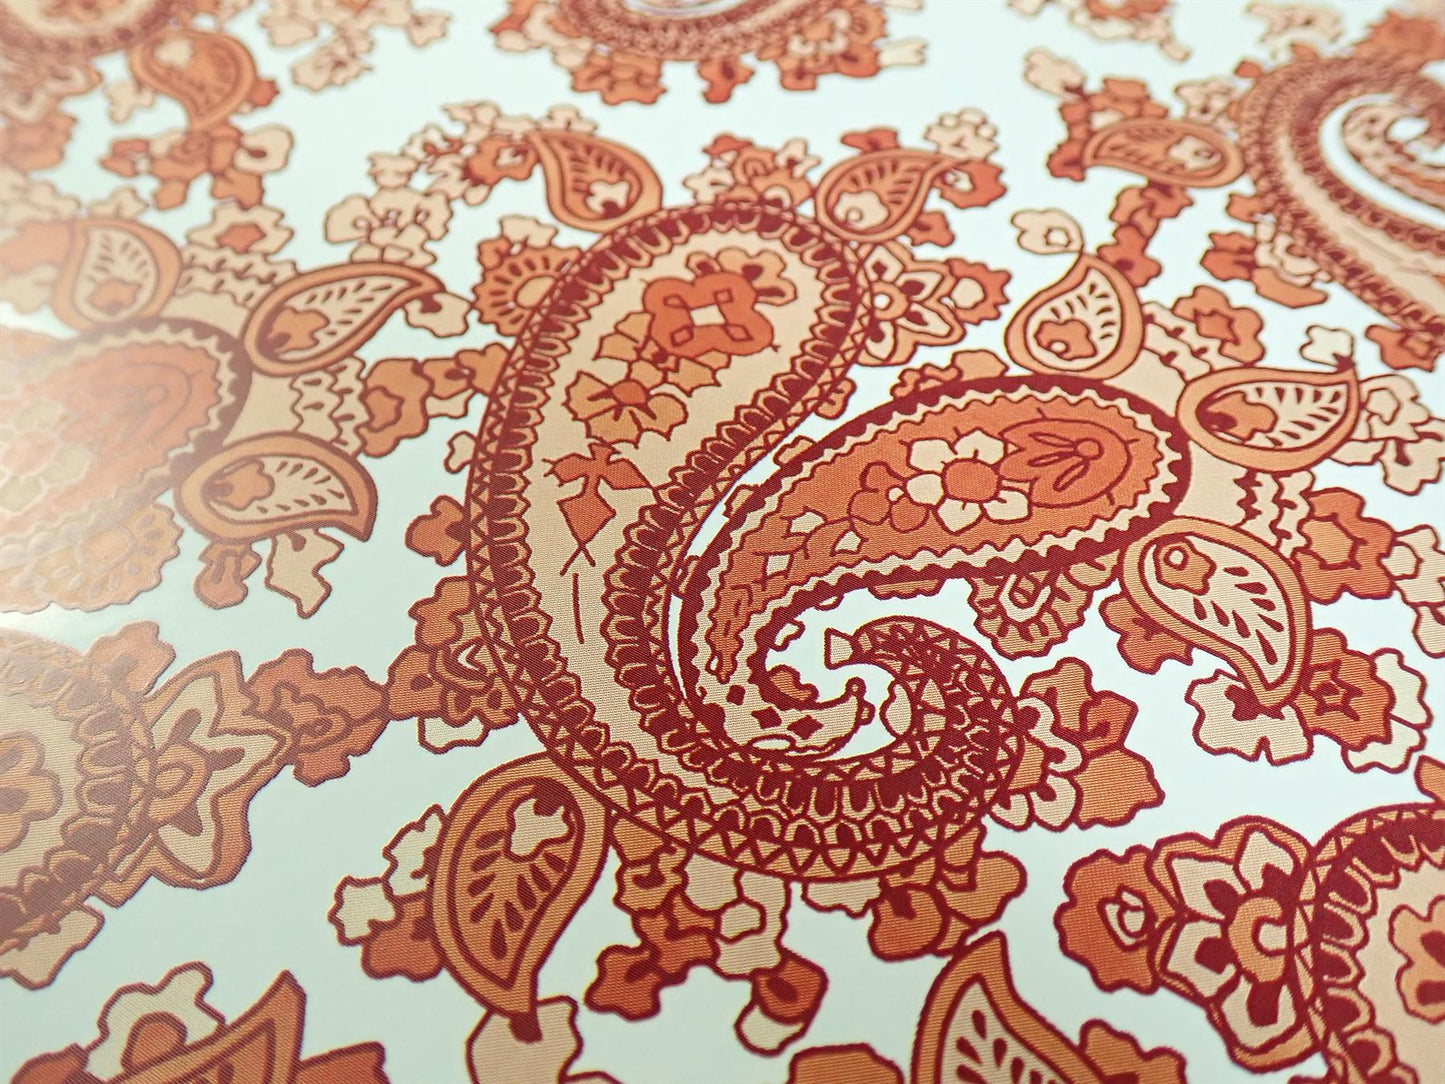 Luthitec Clear Backed Brown Paisley Paper Decal Sheet - 420x295mm (16.5x11.61")